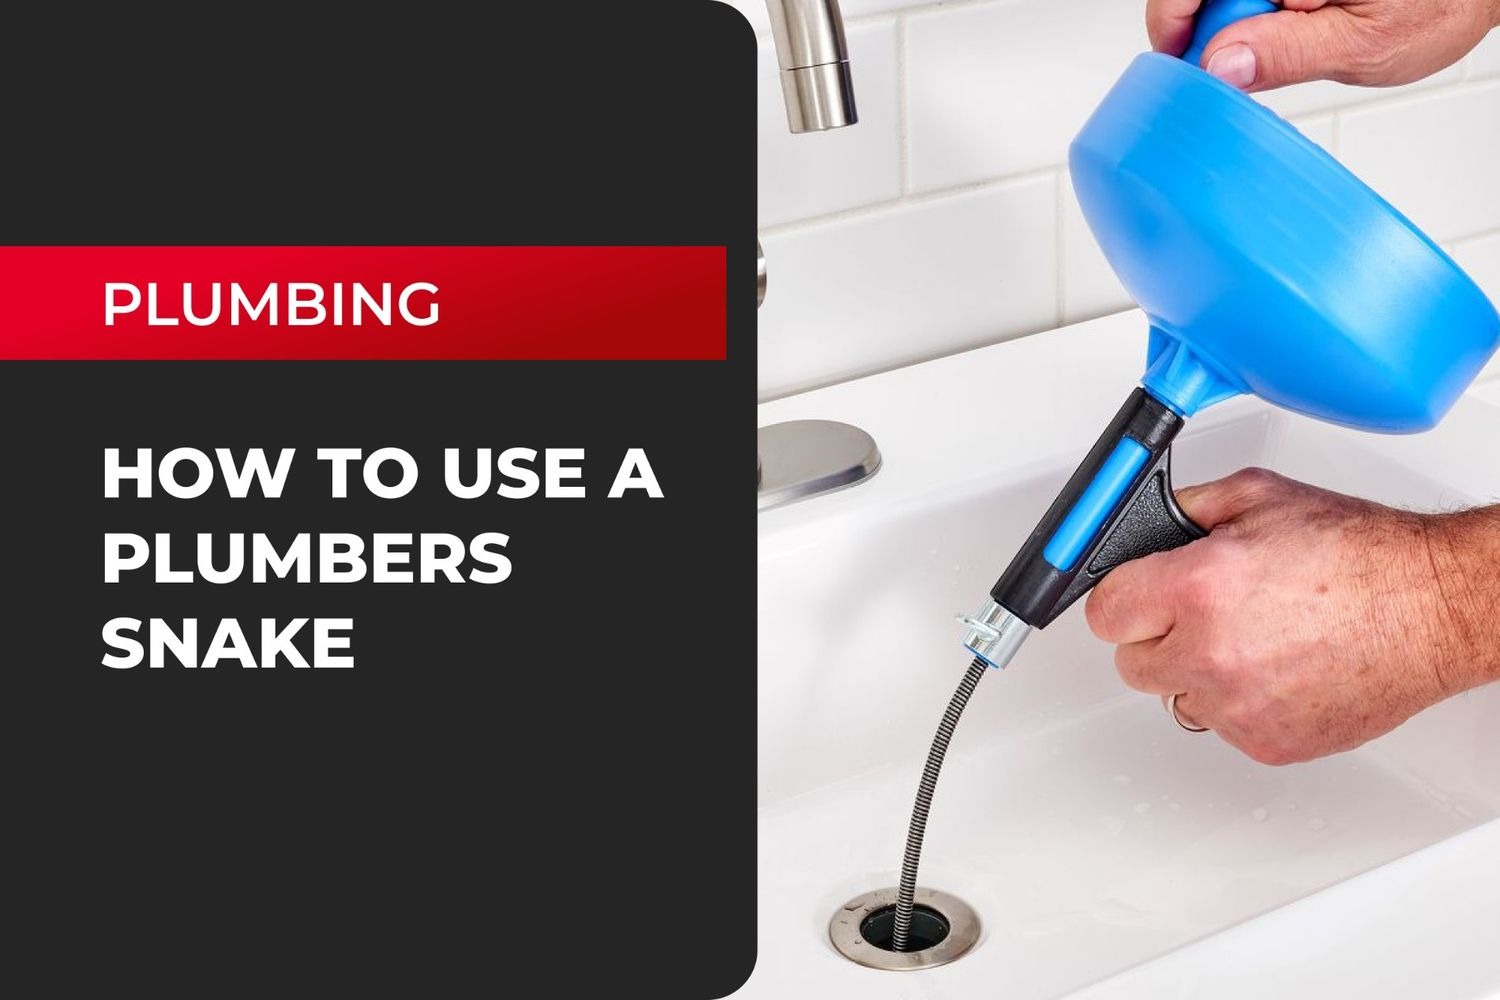 How to Use a Plumber’s Snake